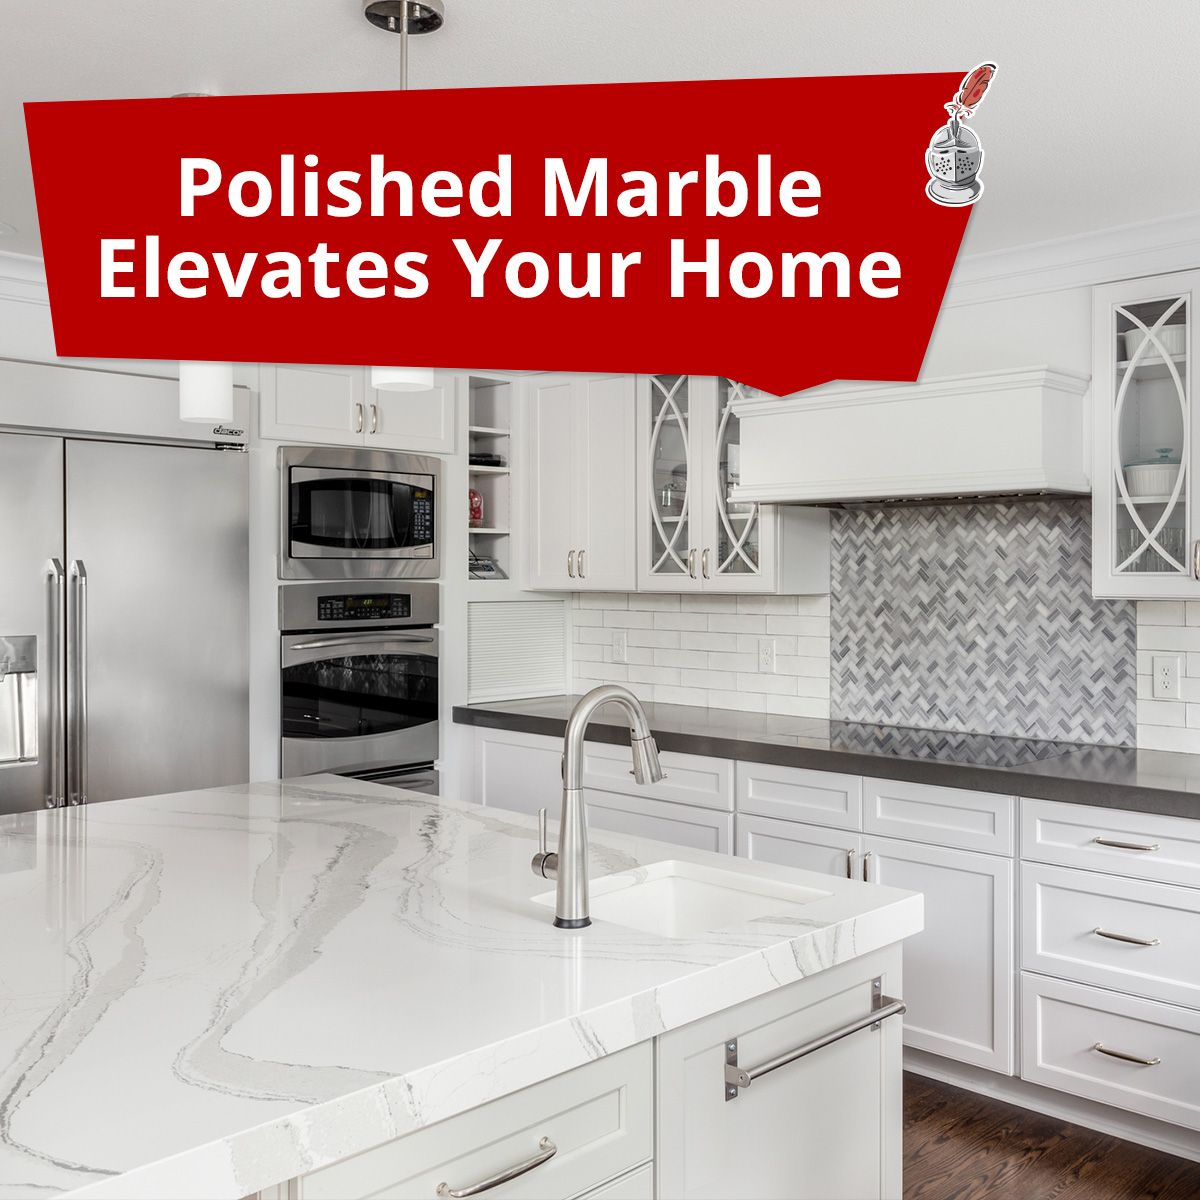 Polished Marble Elevates Your Home